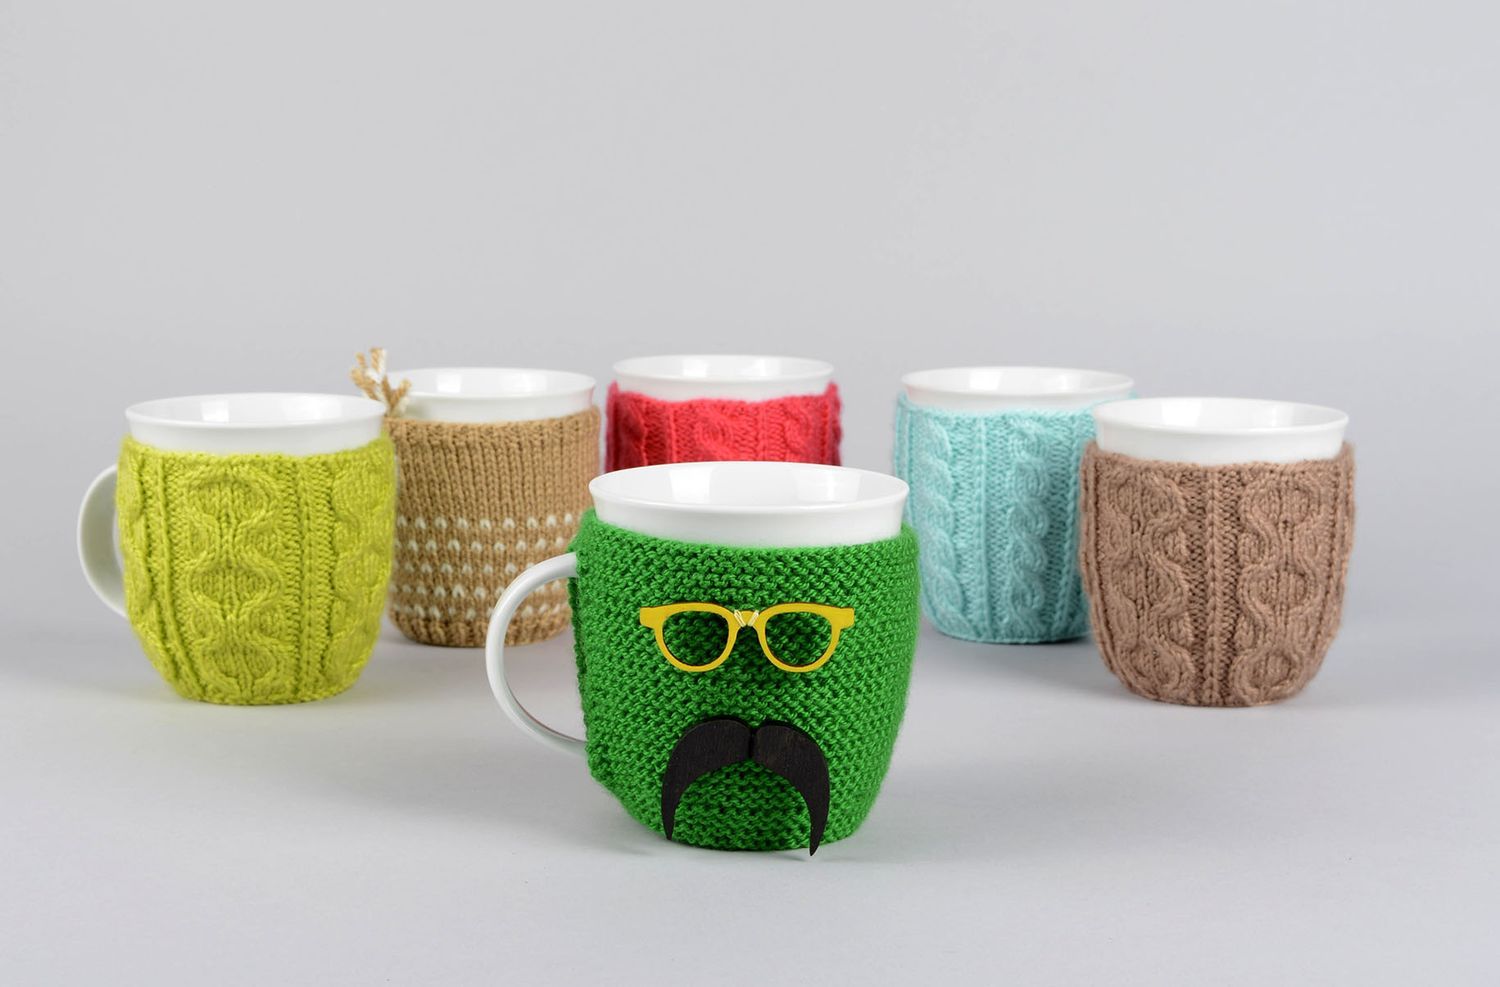 White ceramic porcelain teacup with handle and green man with mustache knitted cover photo 5